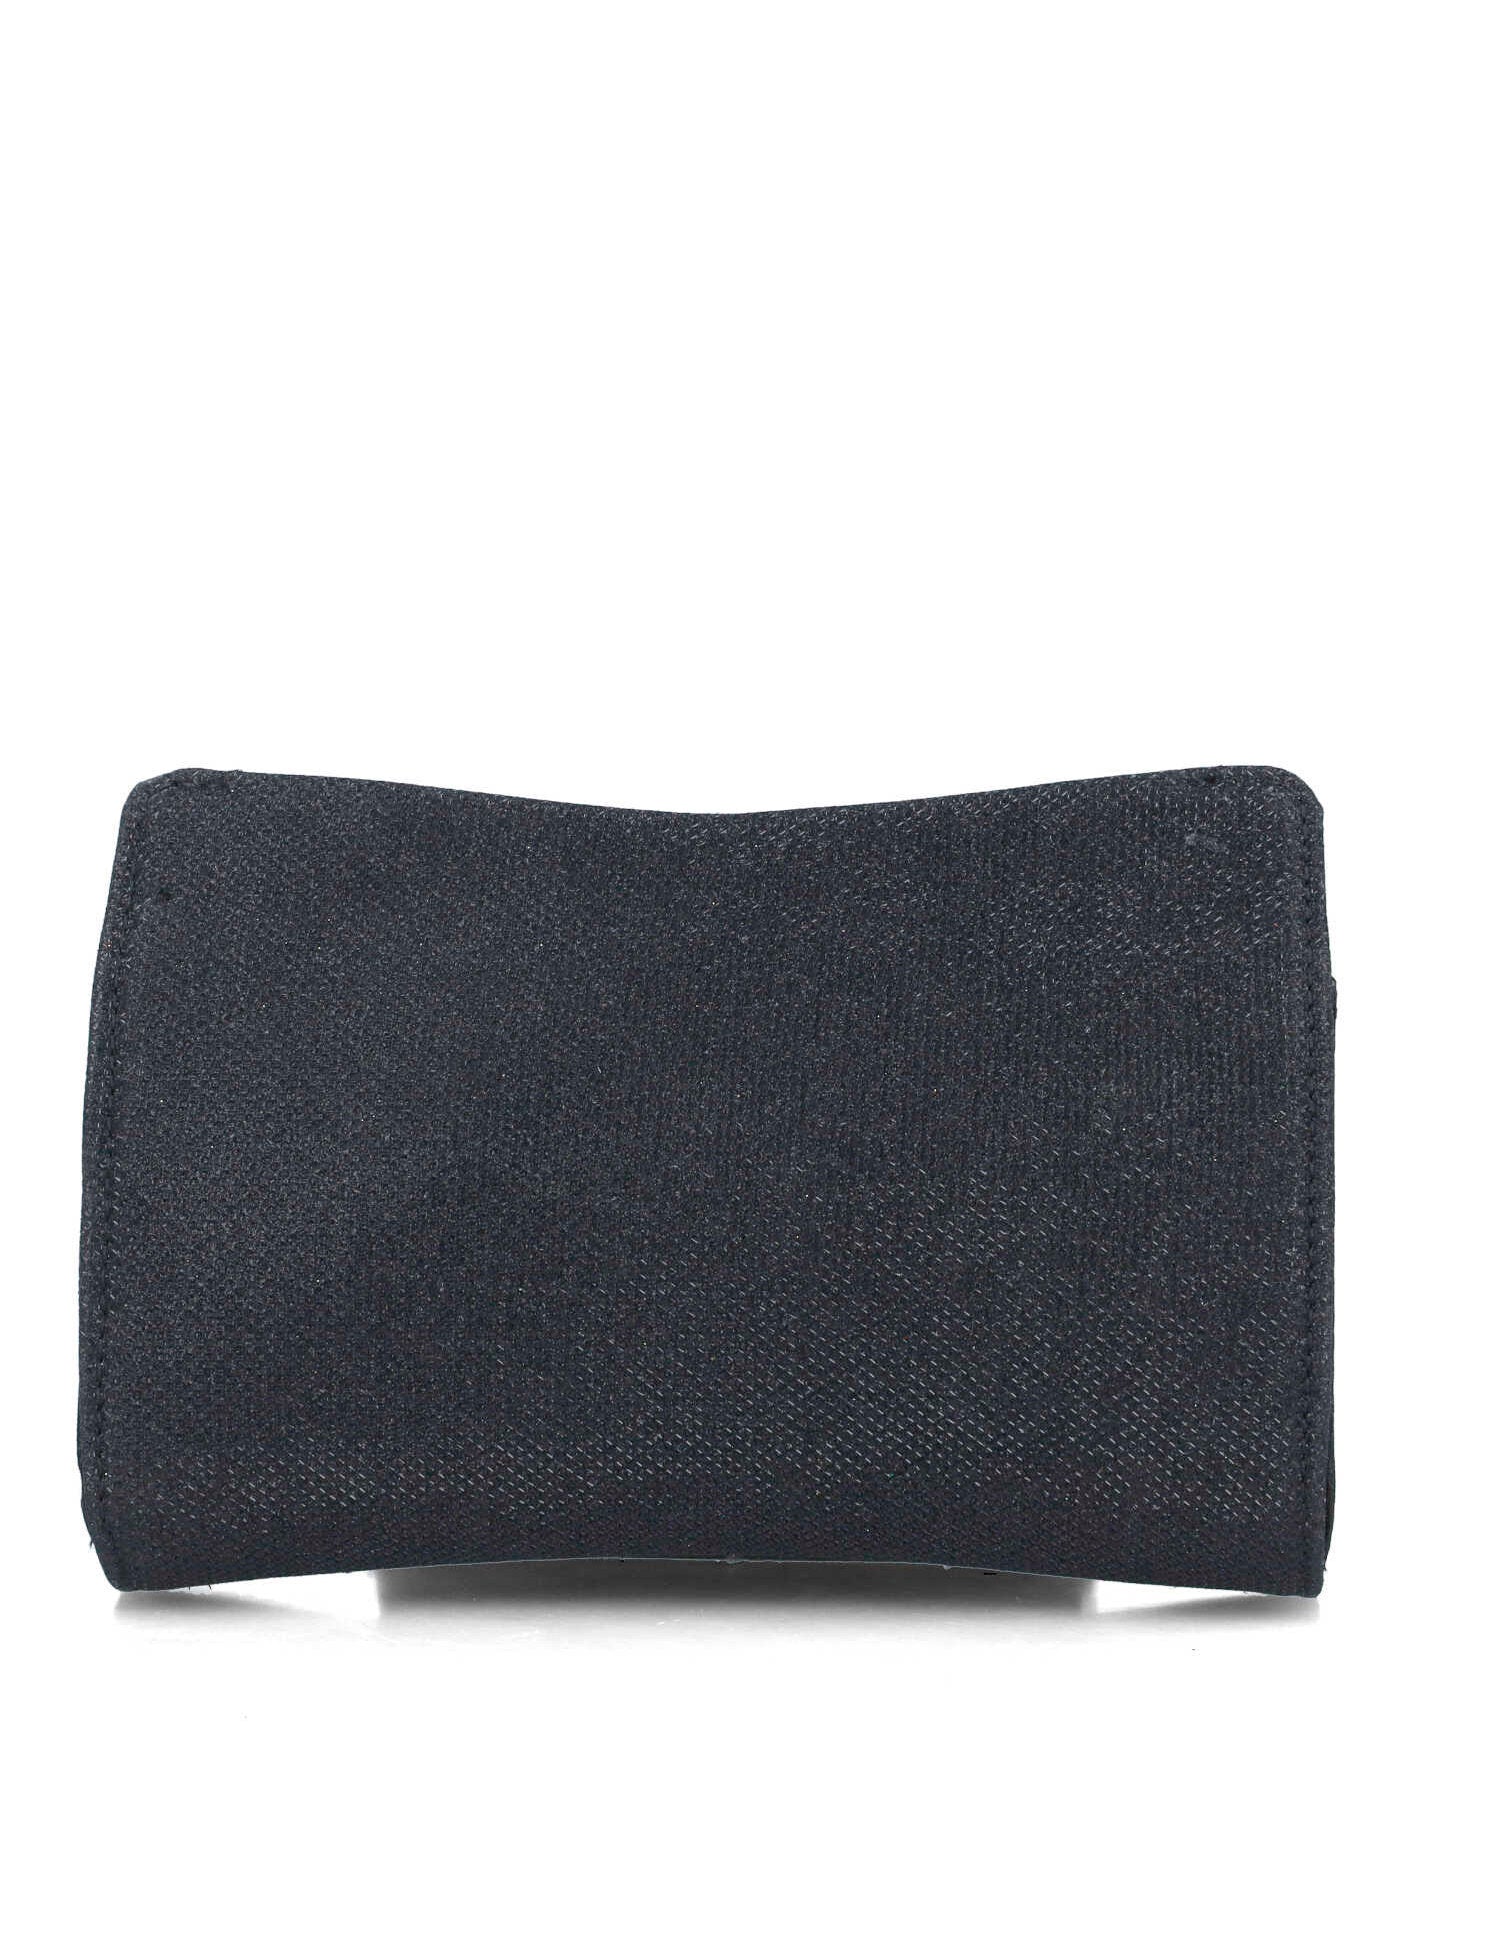 Black Clutch With Hand Strap_85510_01_03